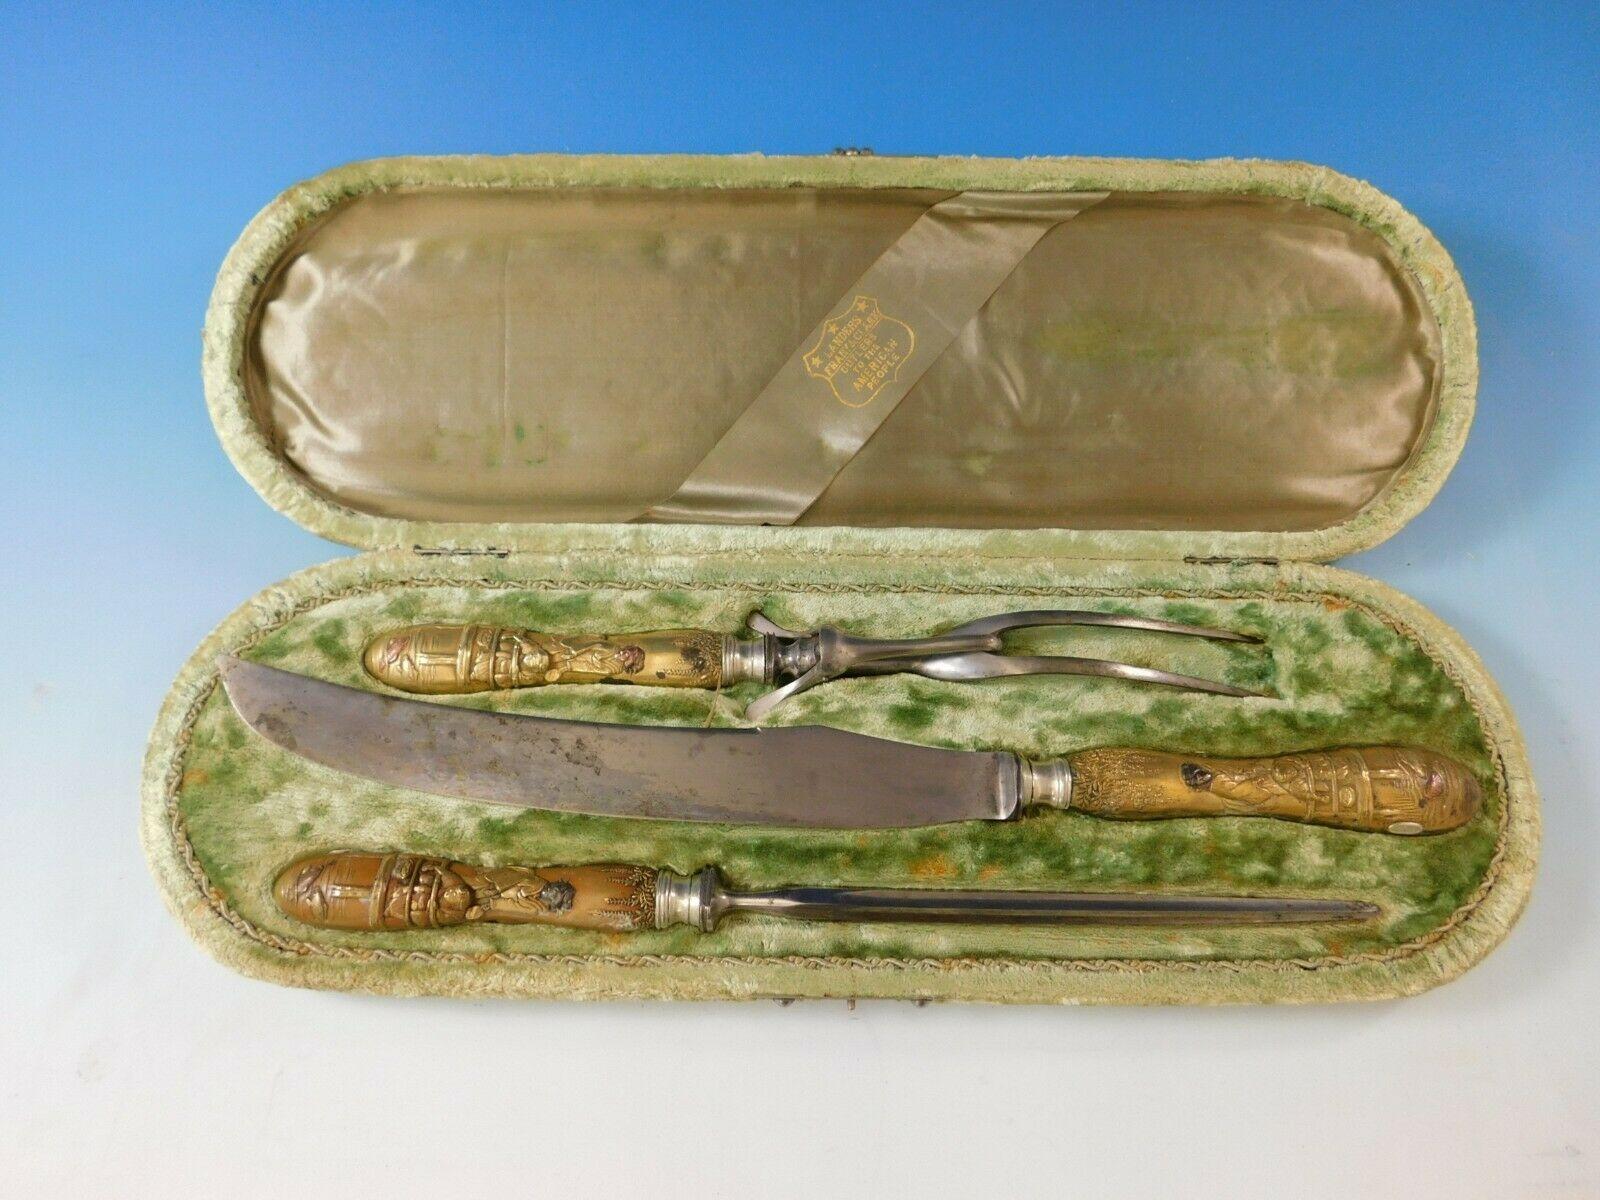 Mixed metals by Landers Frary & Clark

Extraordinary sterling silver roast carving set, 3- piece, including knife 15 1/2